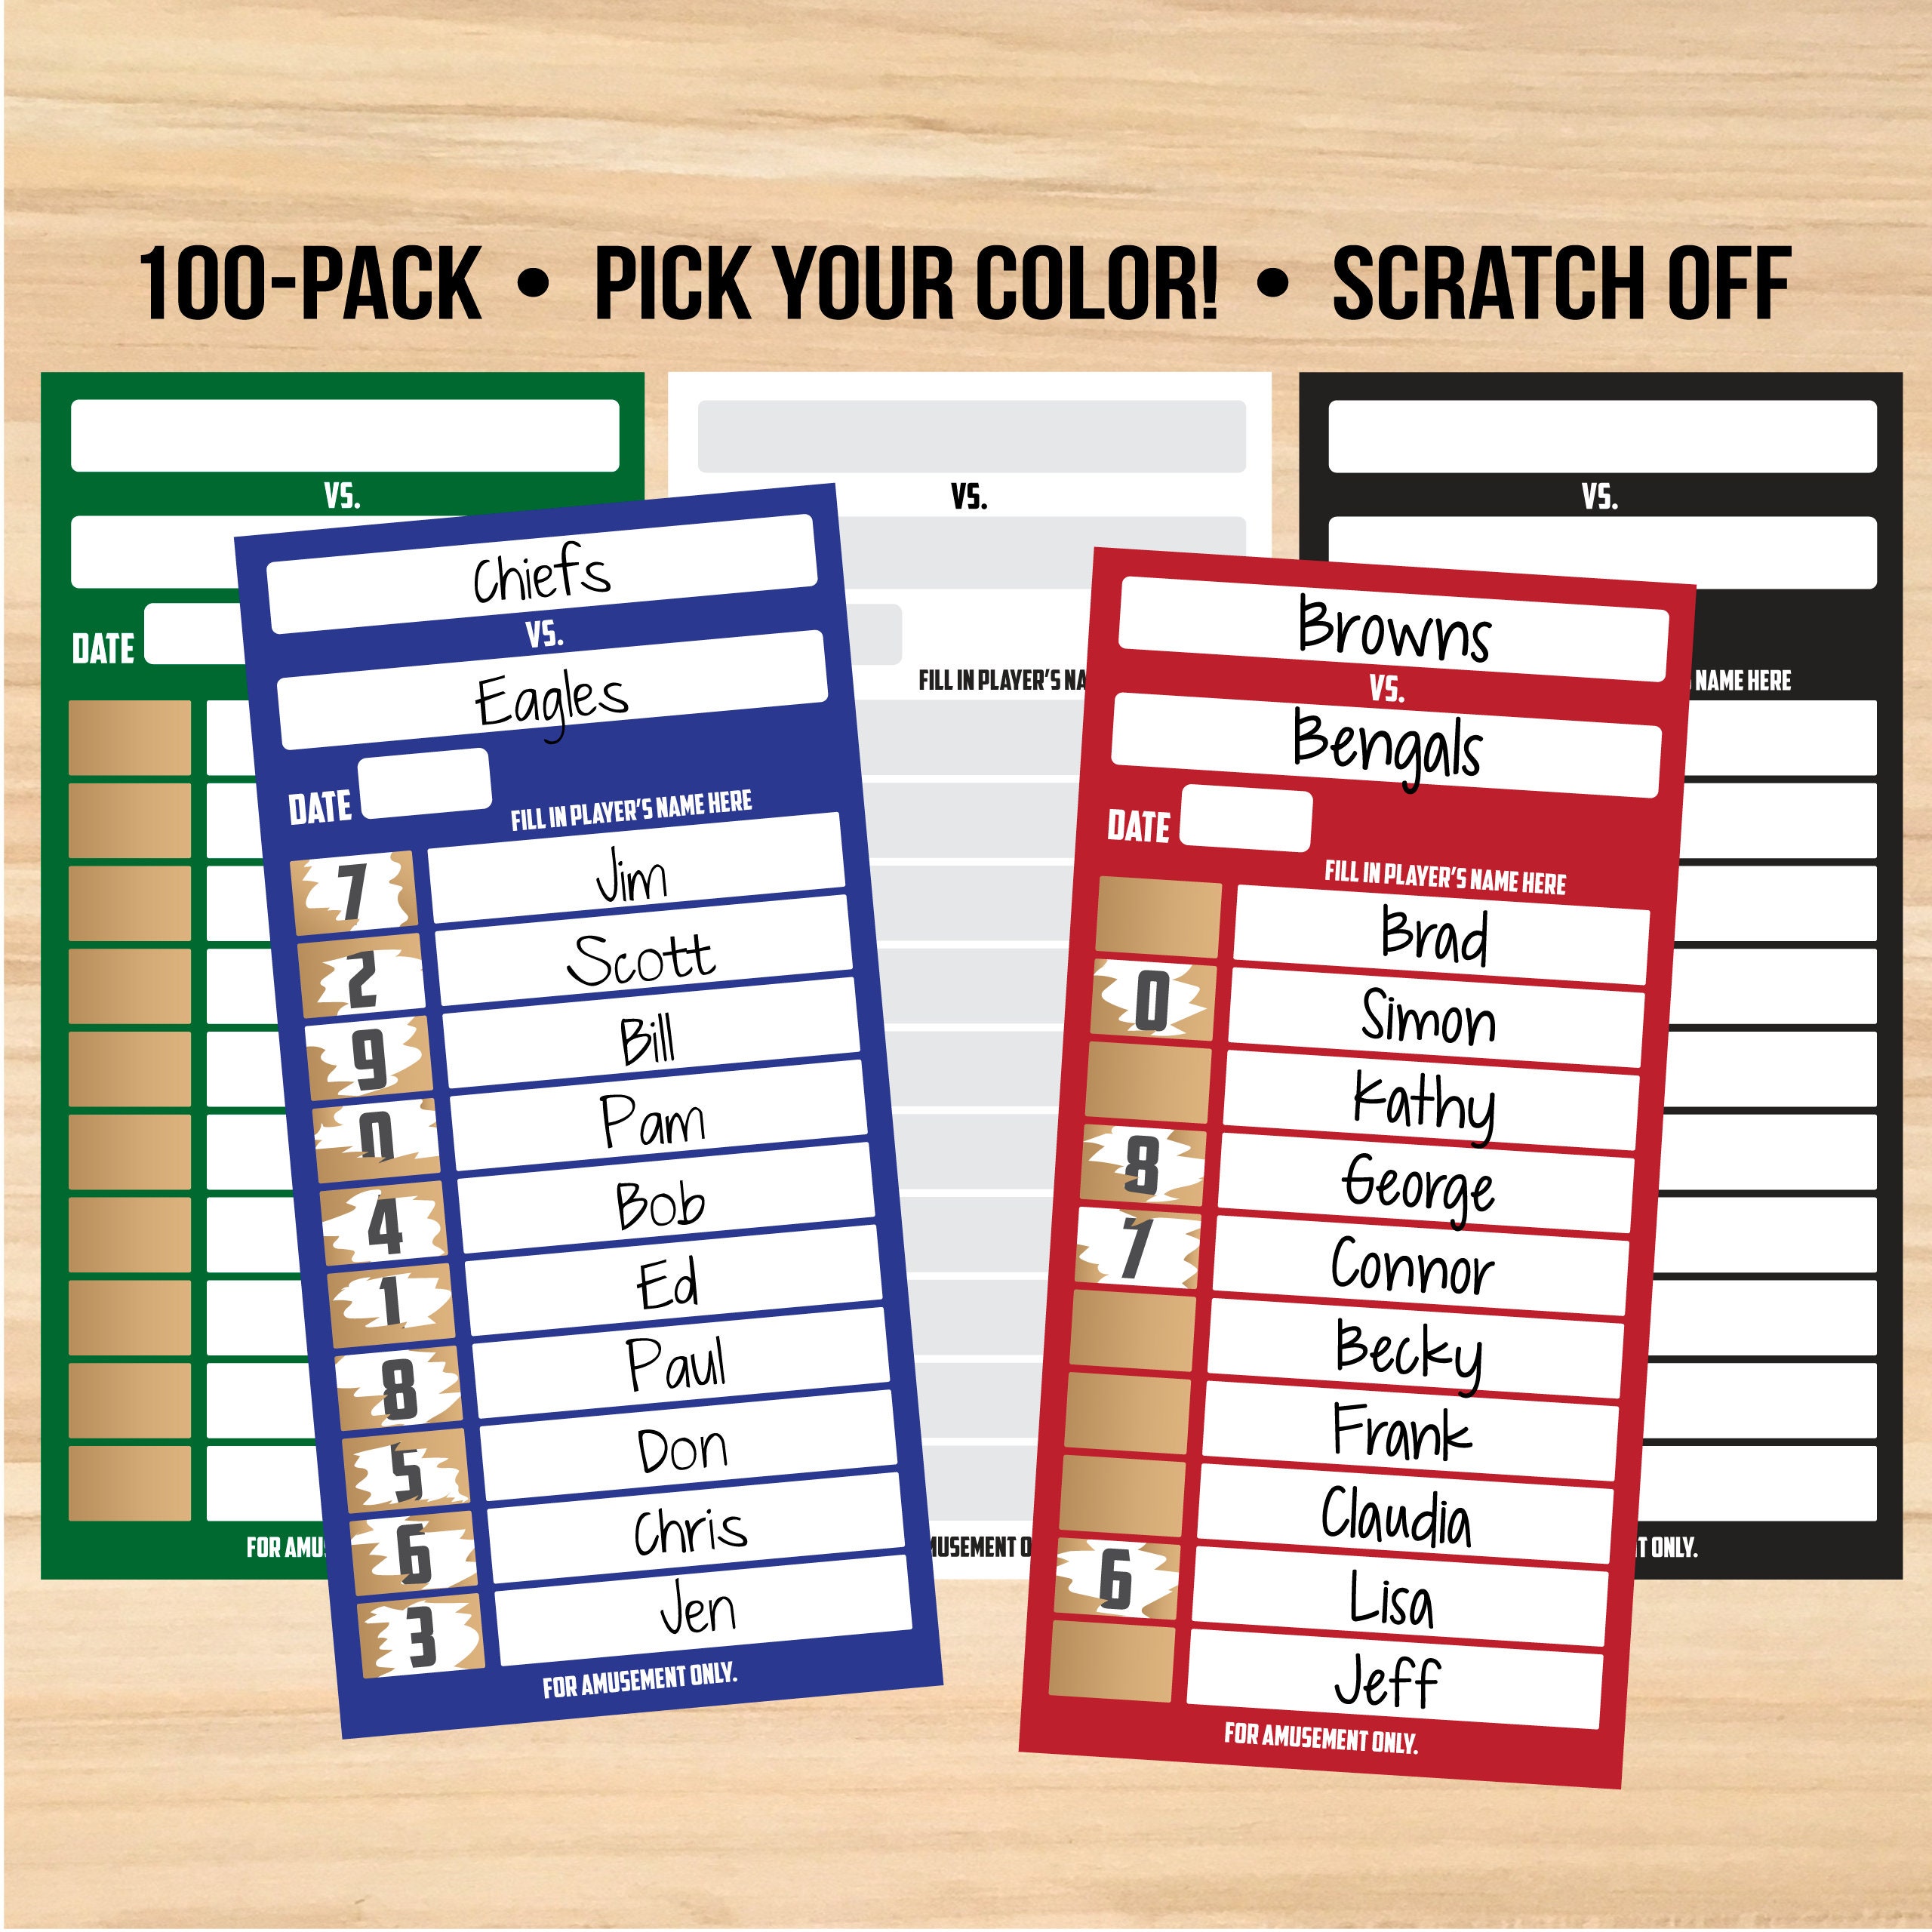  100 Pack 10 Line Sports Strip Cards Super Football Bowl  Football Pool Cards, 100 No-repeat Green Baseball Boxing Soccer Football Strip  Cards Playing Scratch Off Cards for Super Football Party Favor 